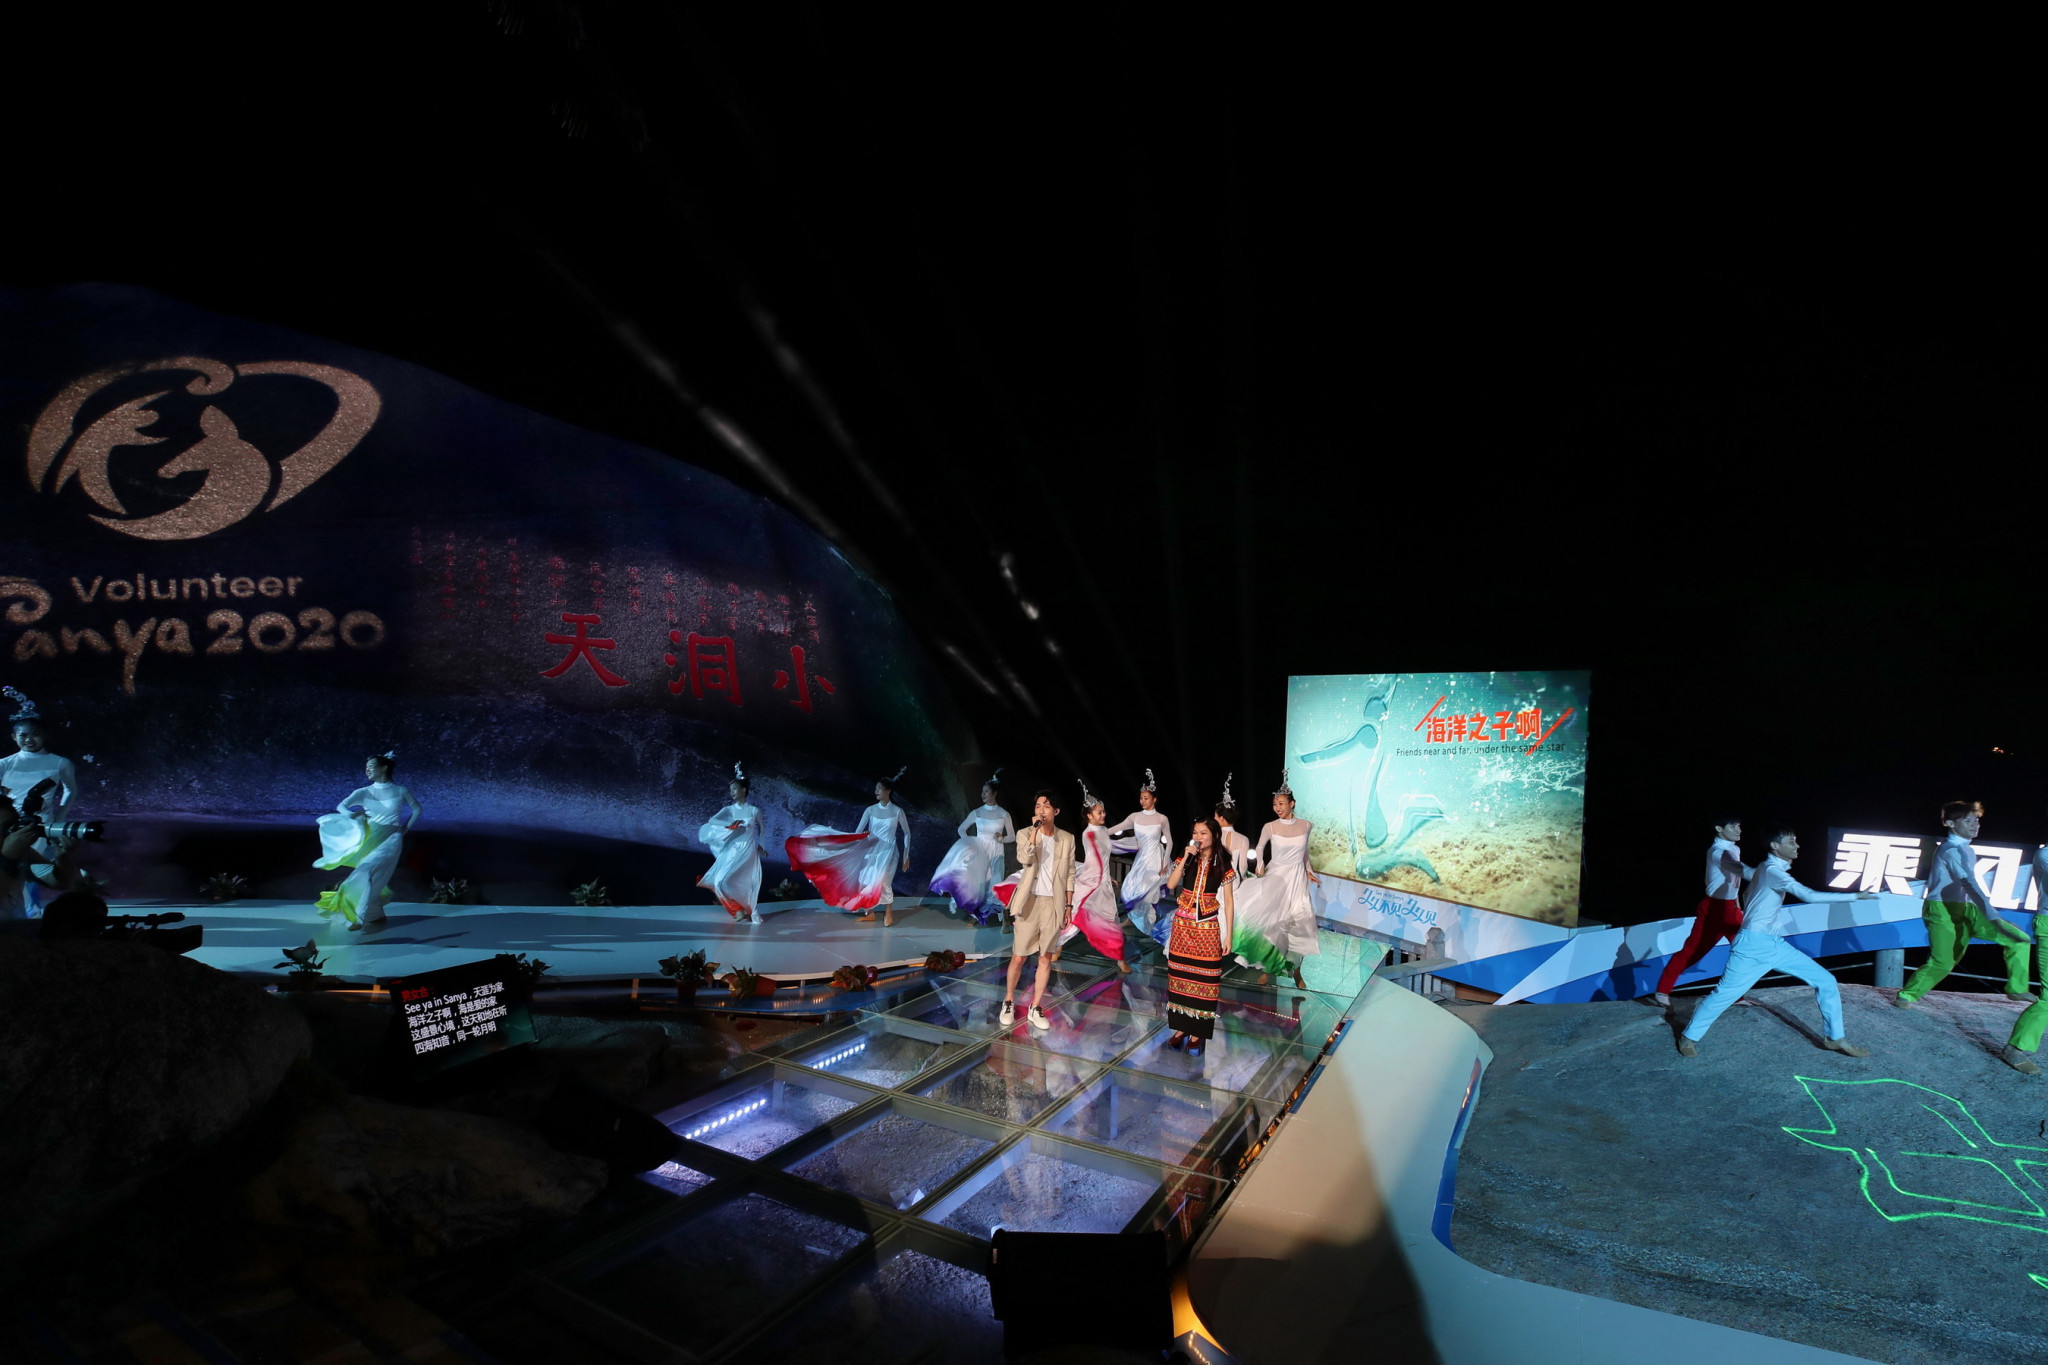 The theme song for the 2020 Asian Beach Games in Sanya has been officially launched, although there are doubts the event will take place as planned ©Sanya 2020